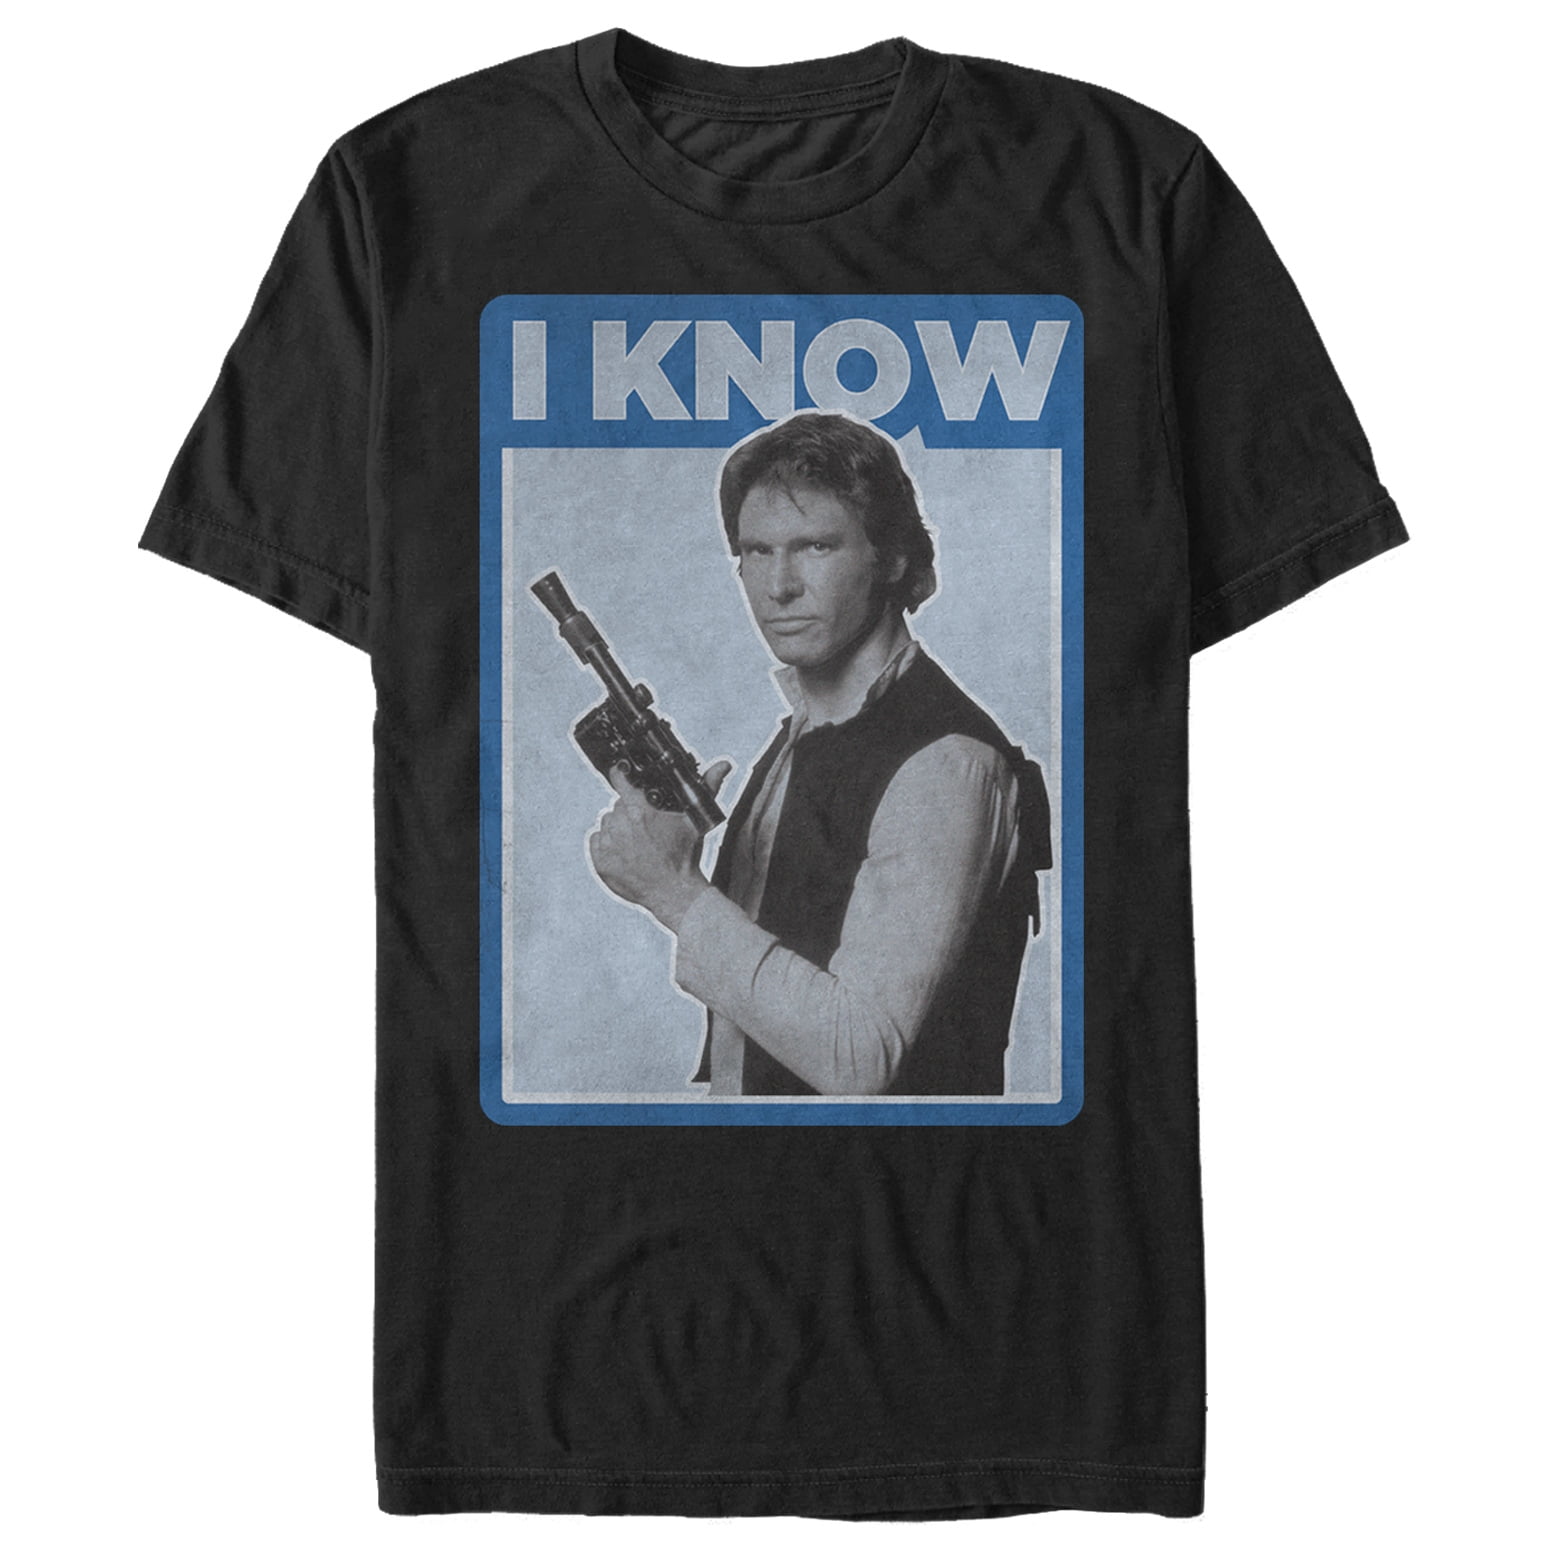 Details about   Chewbacca Hans Solo Star Wars Rebels T-Shirt Tee Kids Boys Officially Licensed 